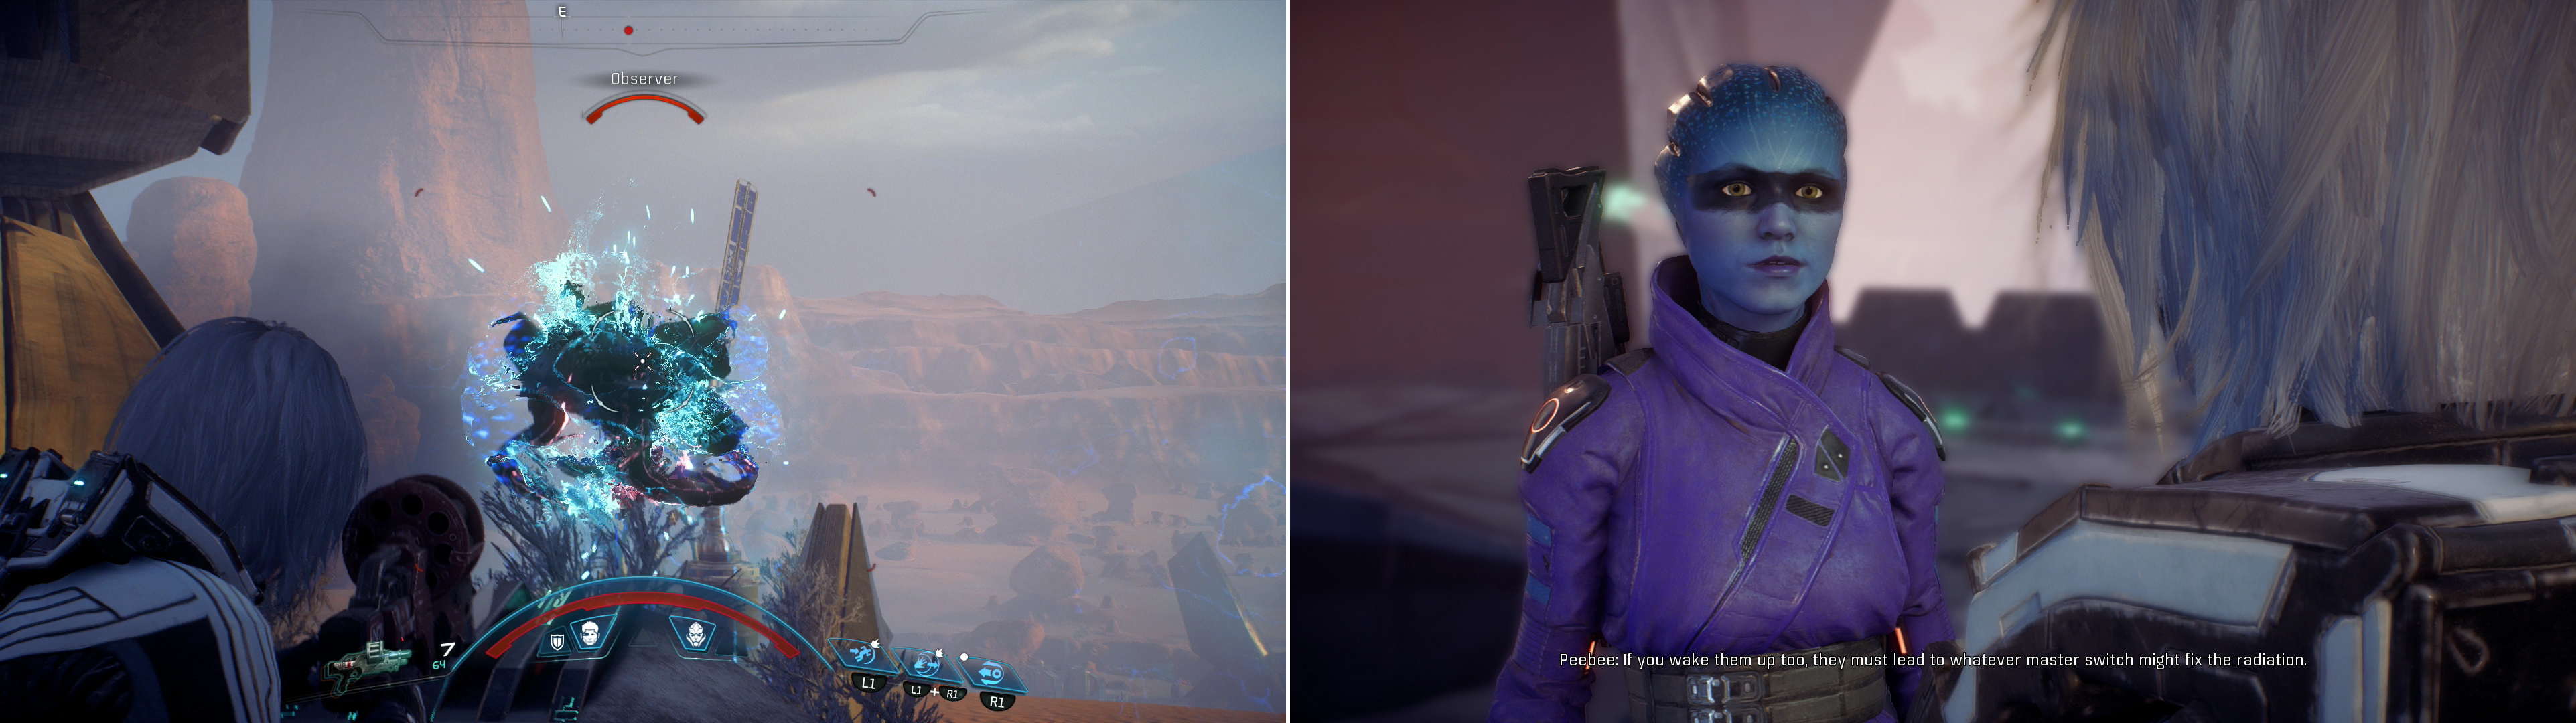 Dispatch the Remnant who contest your tampering with the Remnant monolith (left) after which continue chatting with Peebee to learn more baout these alien machines (right).